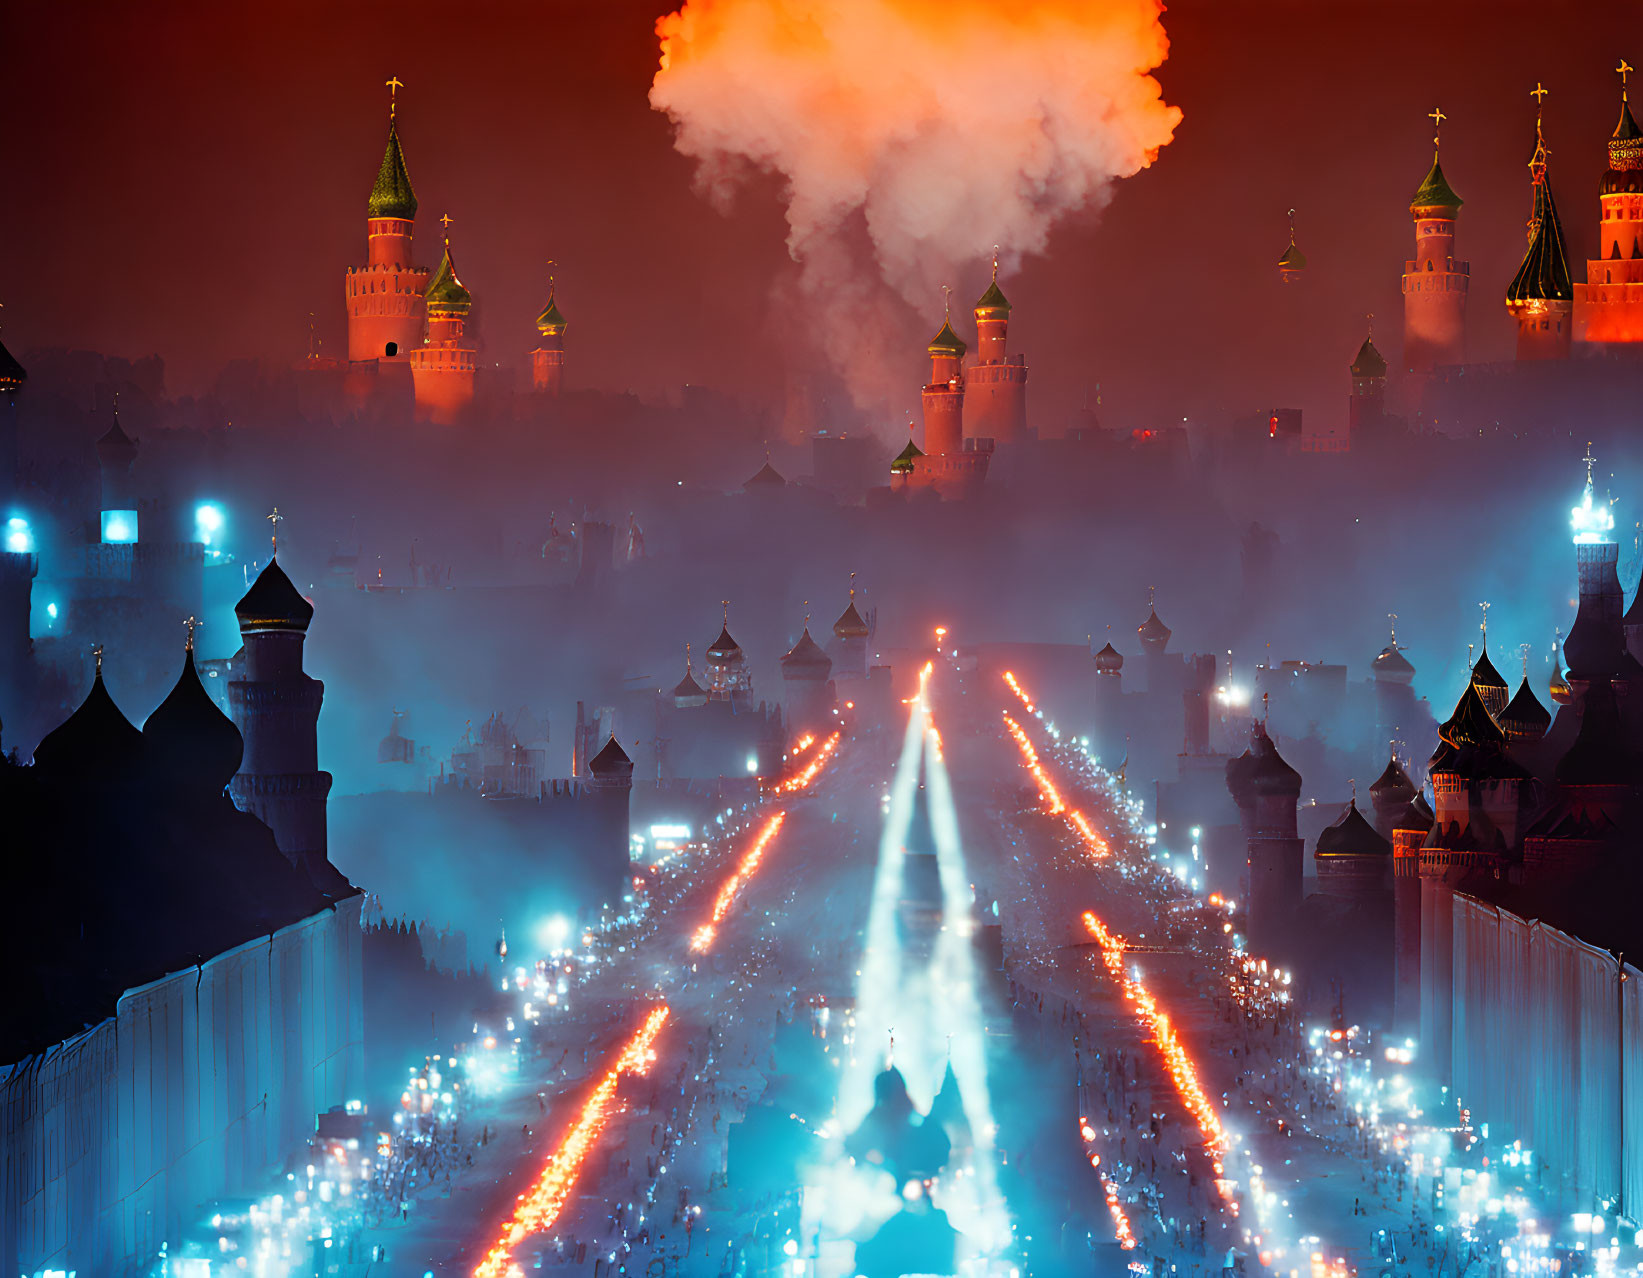 Cityscape at night with illuminated streets and historical buildings in foggy atmosphere